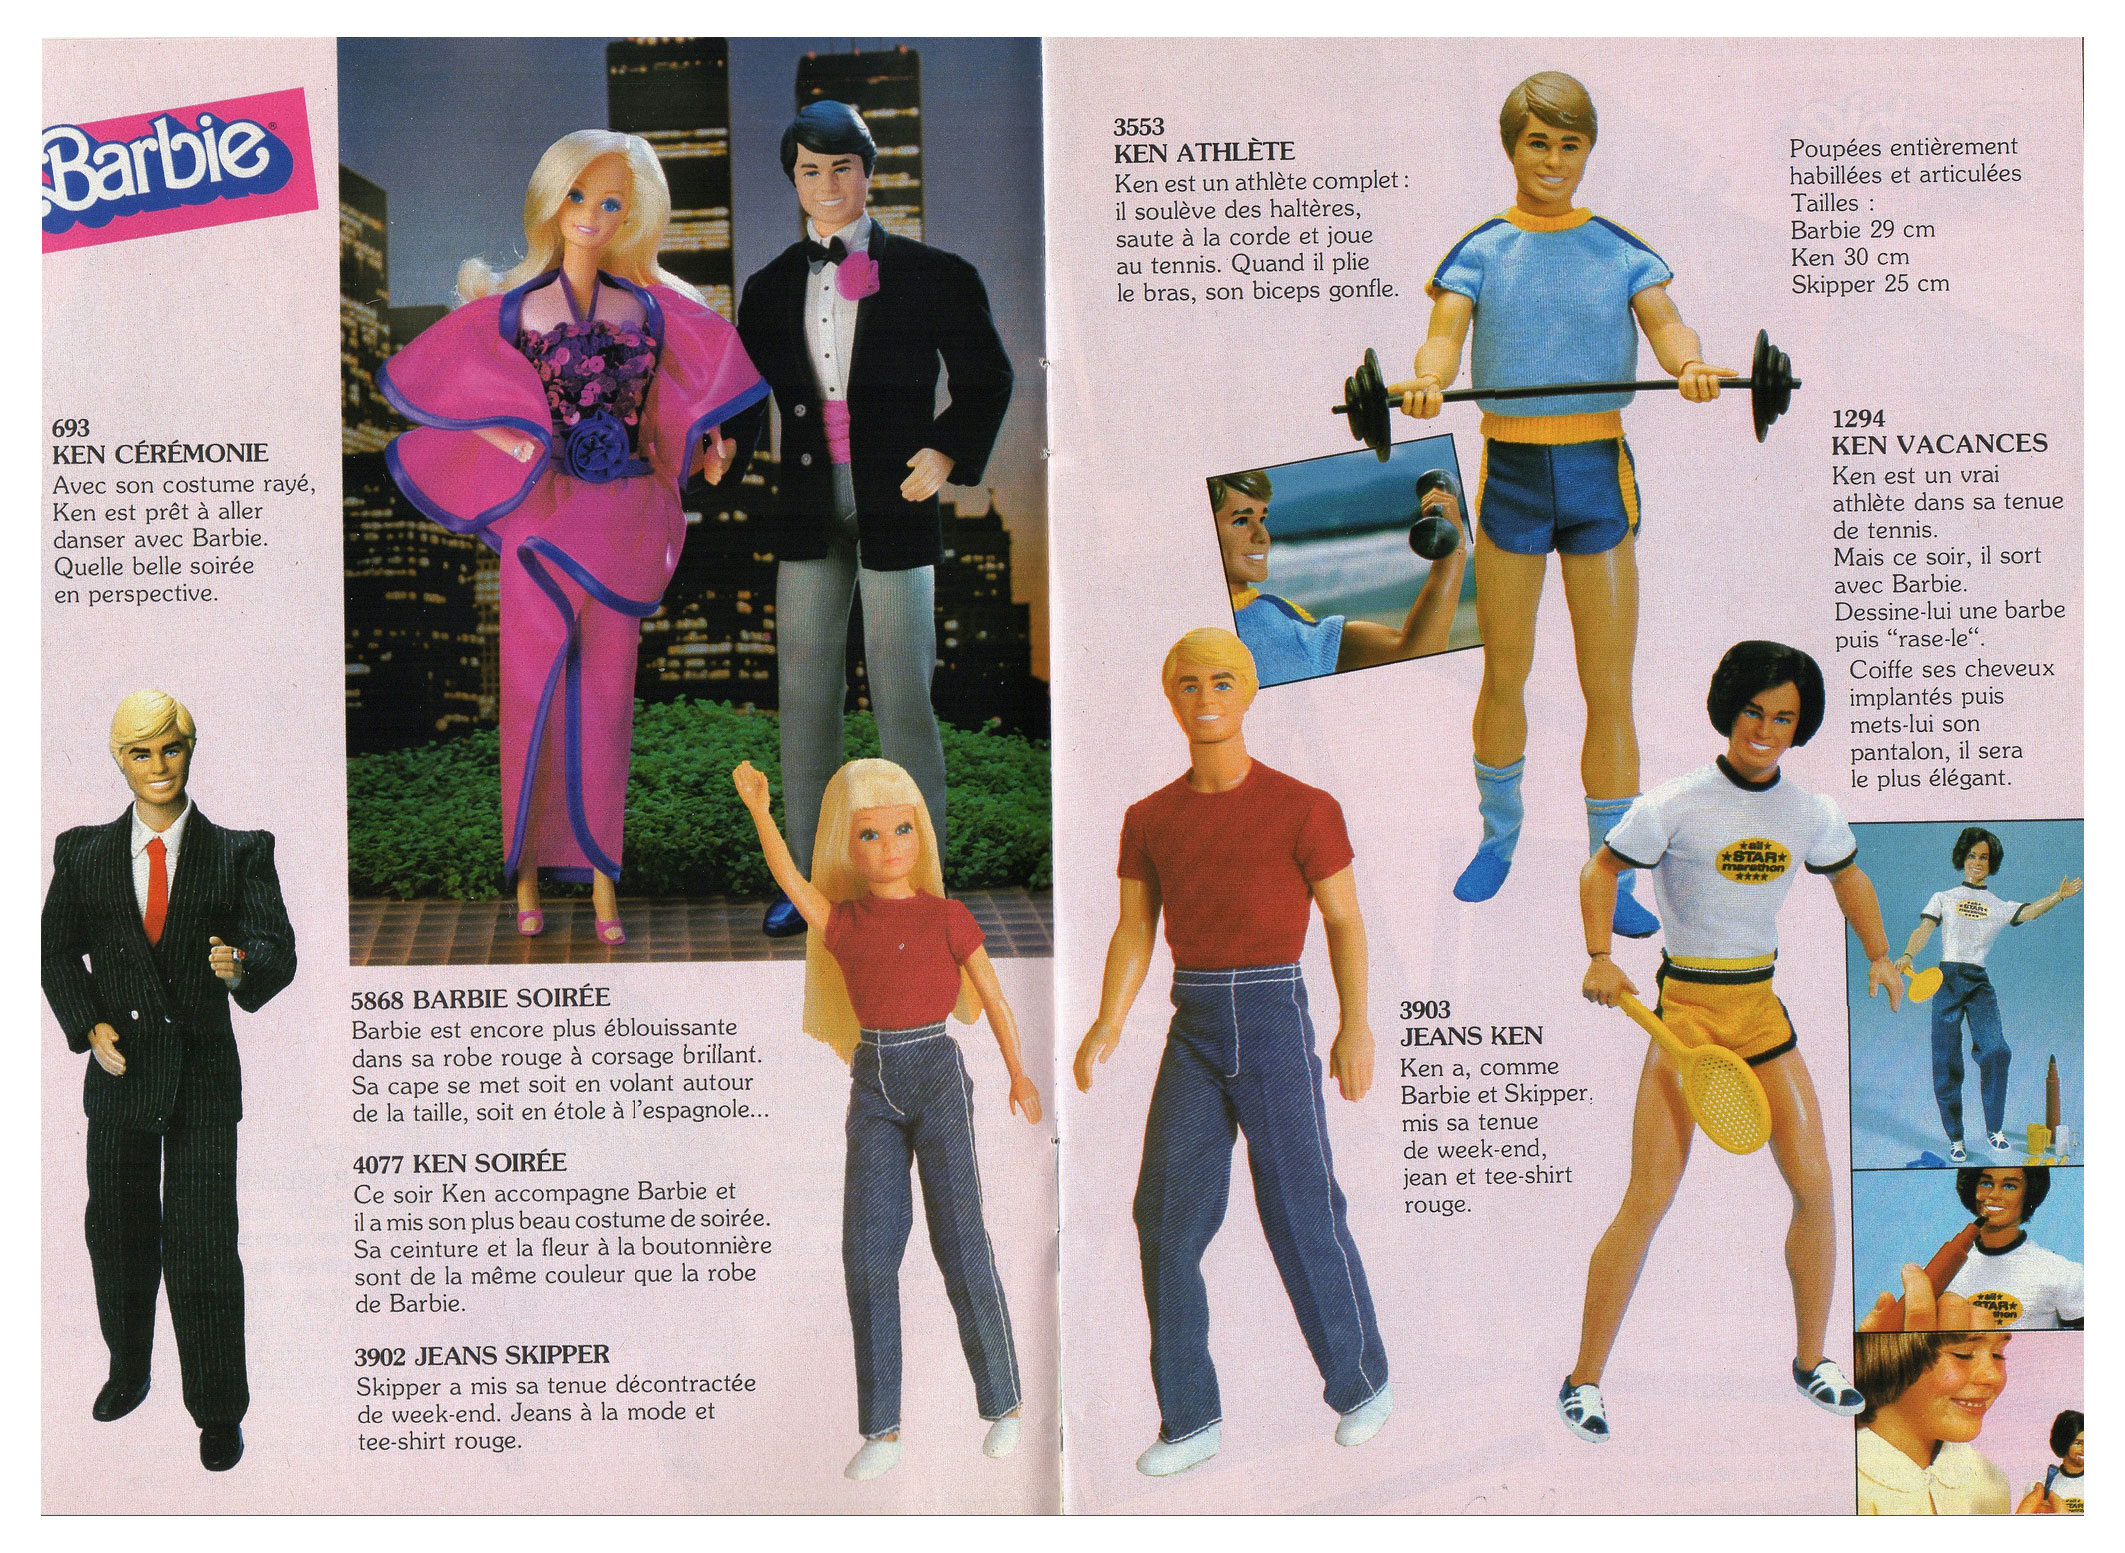 From 1983 French Mattel Toy catalogue